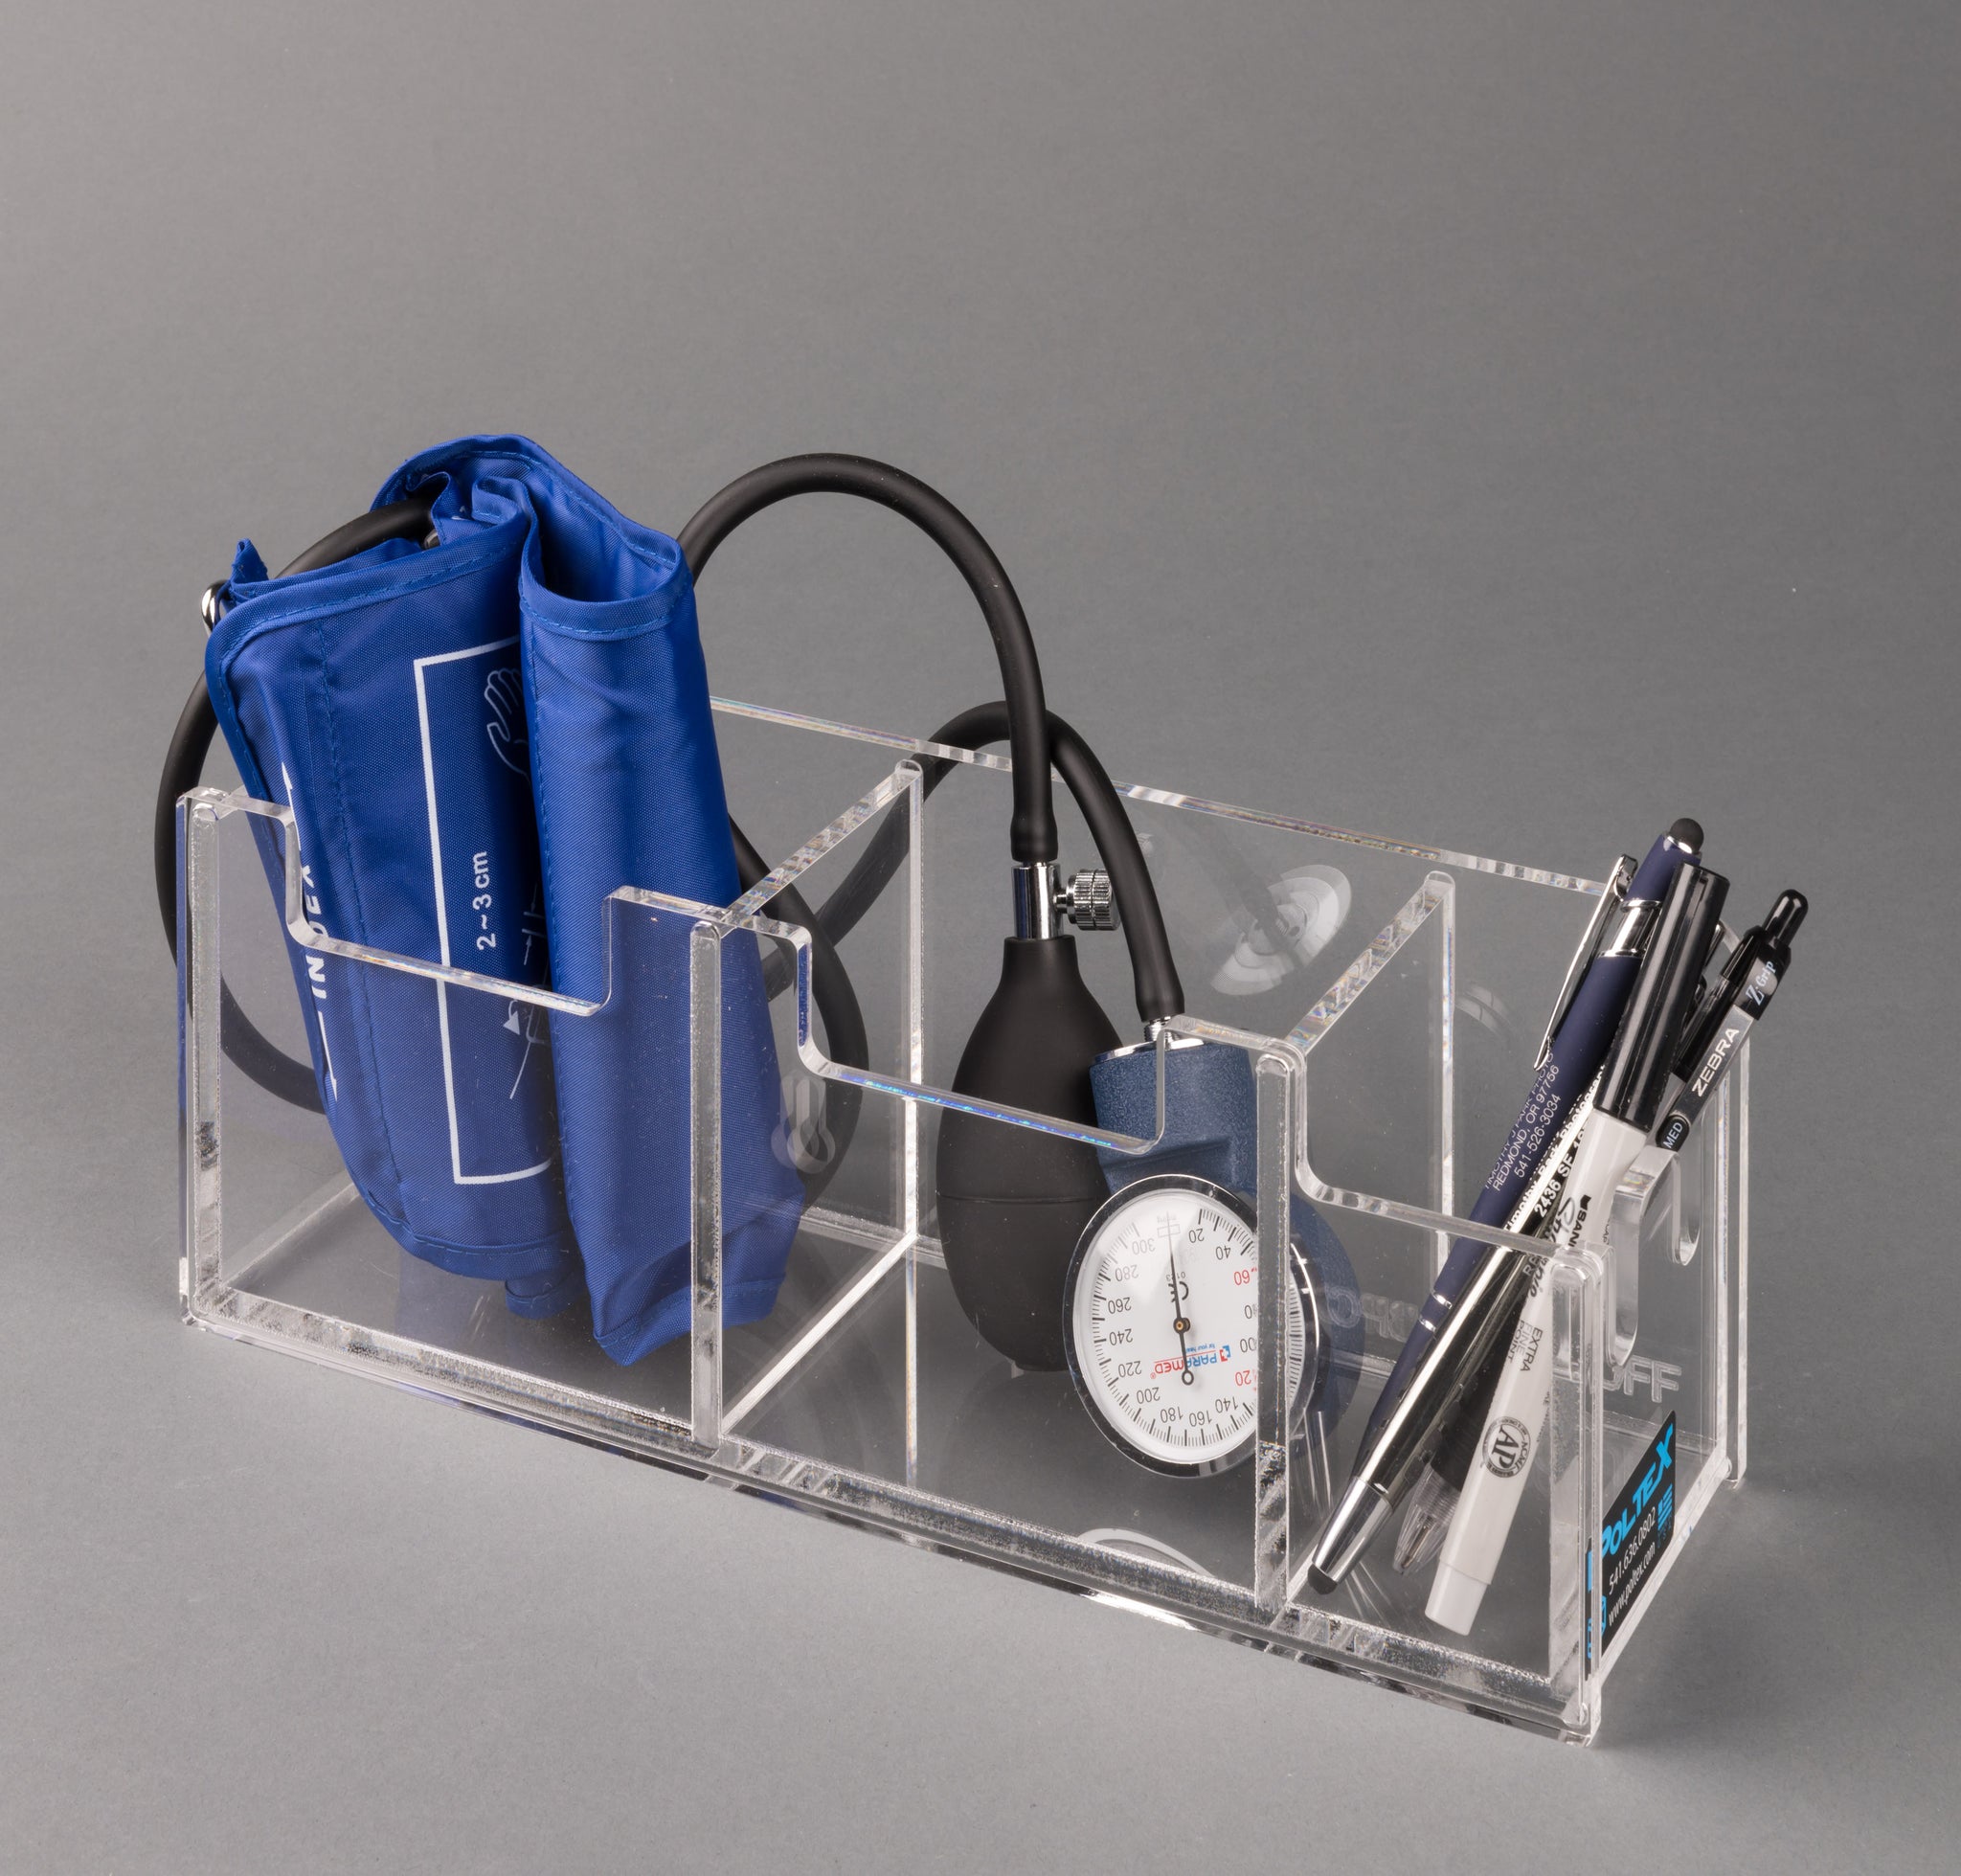 Poltex Phlebotomy Supply Organizer Station Includes: Wall Mount